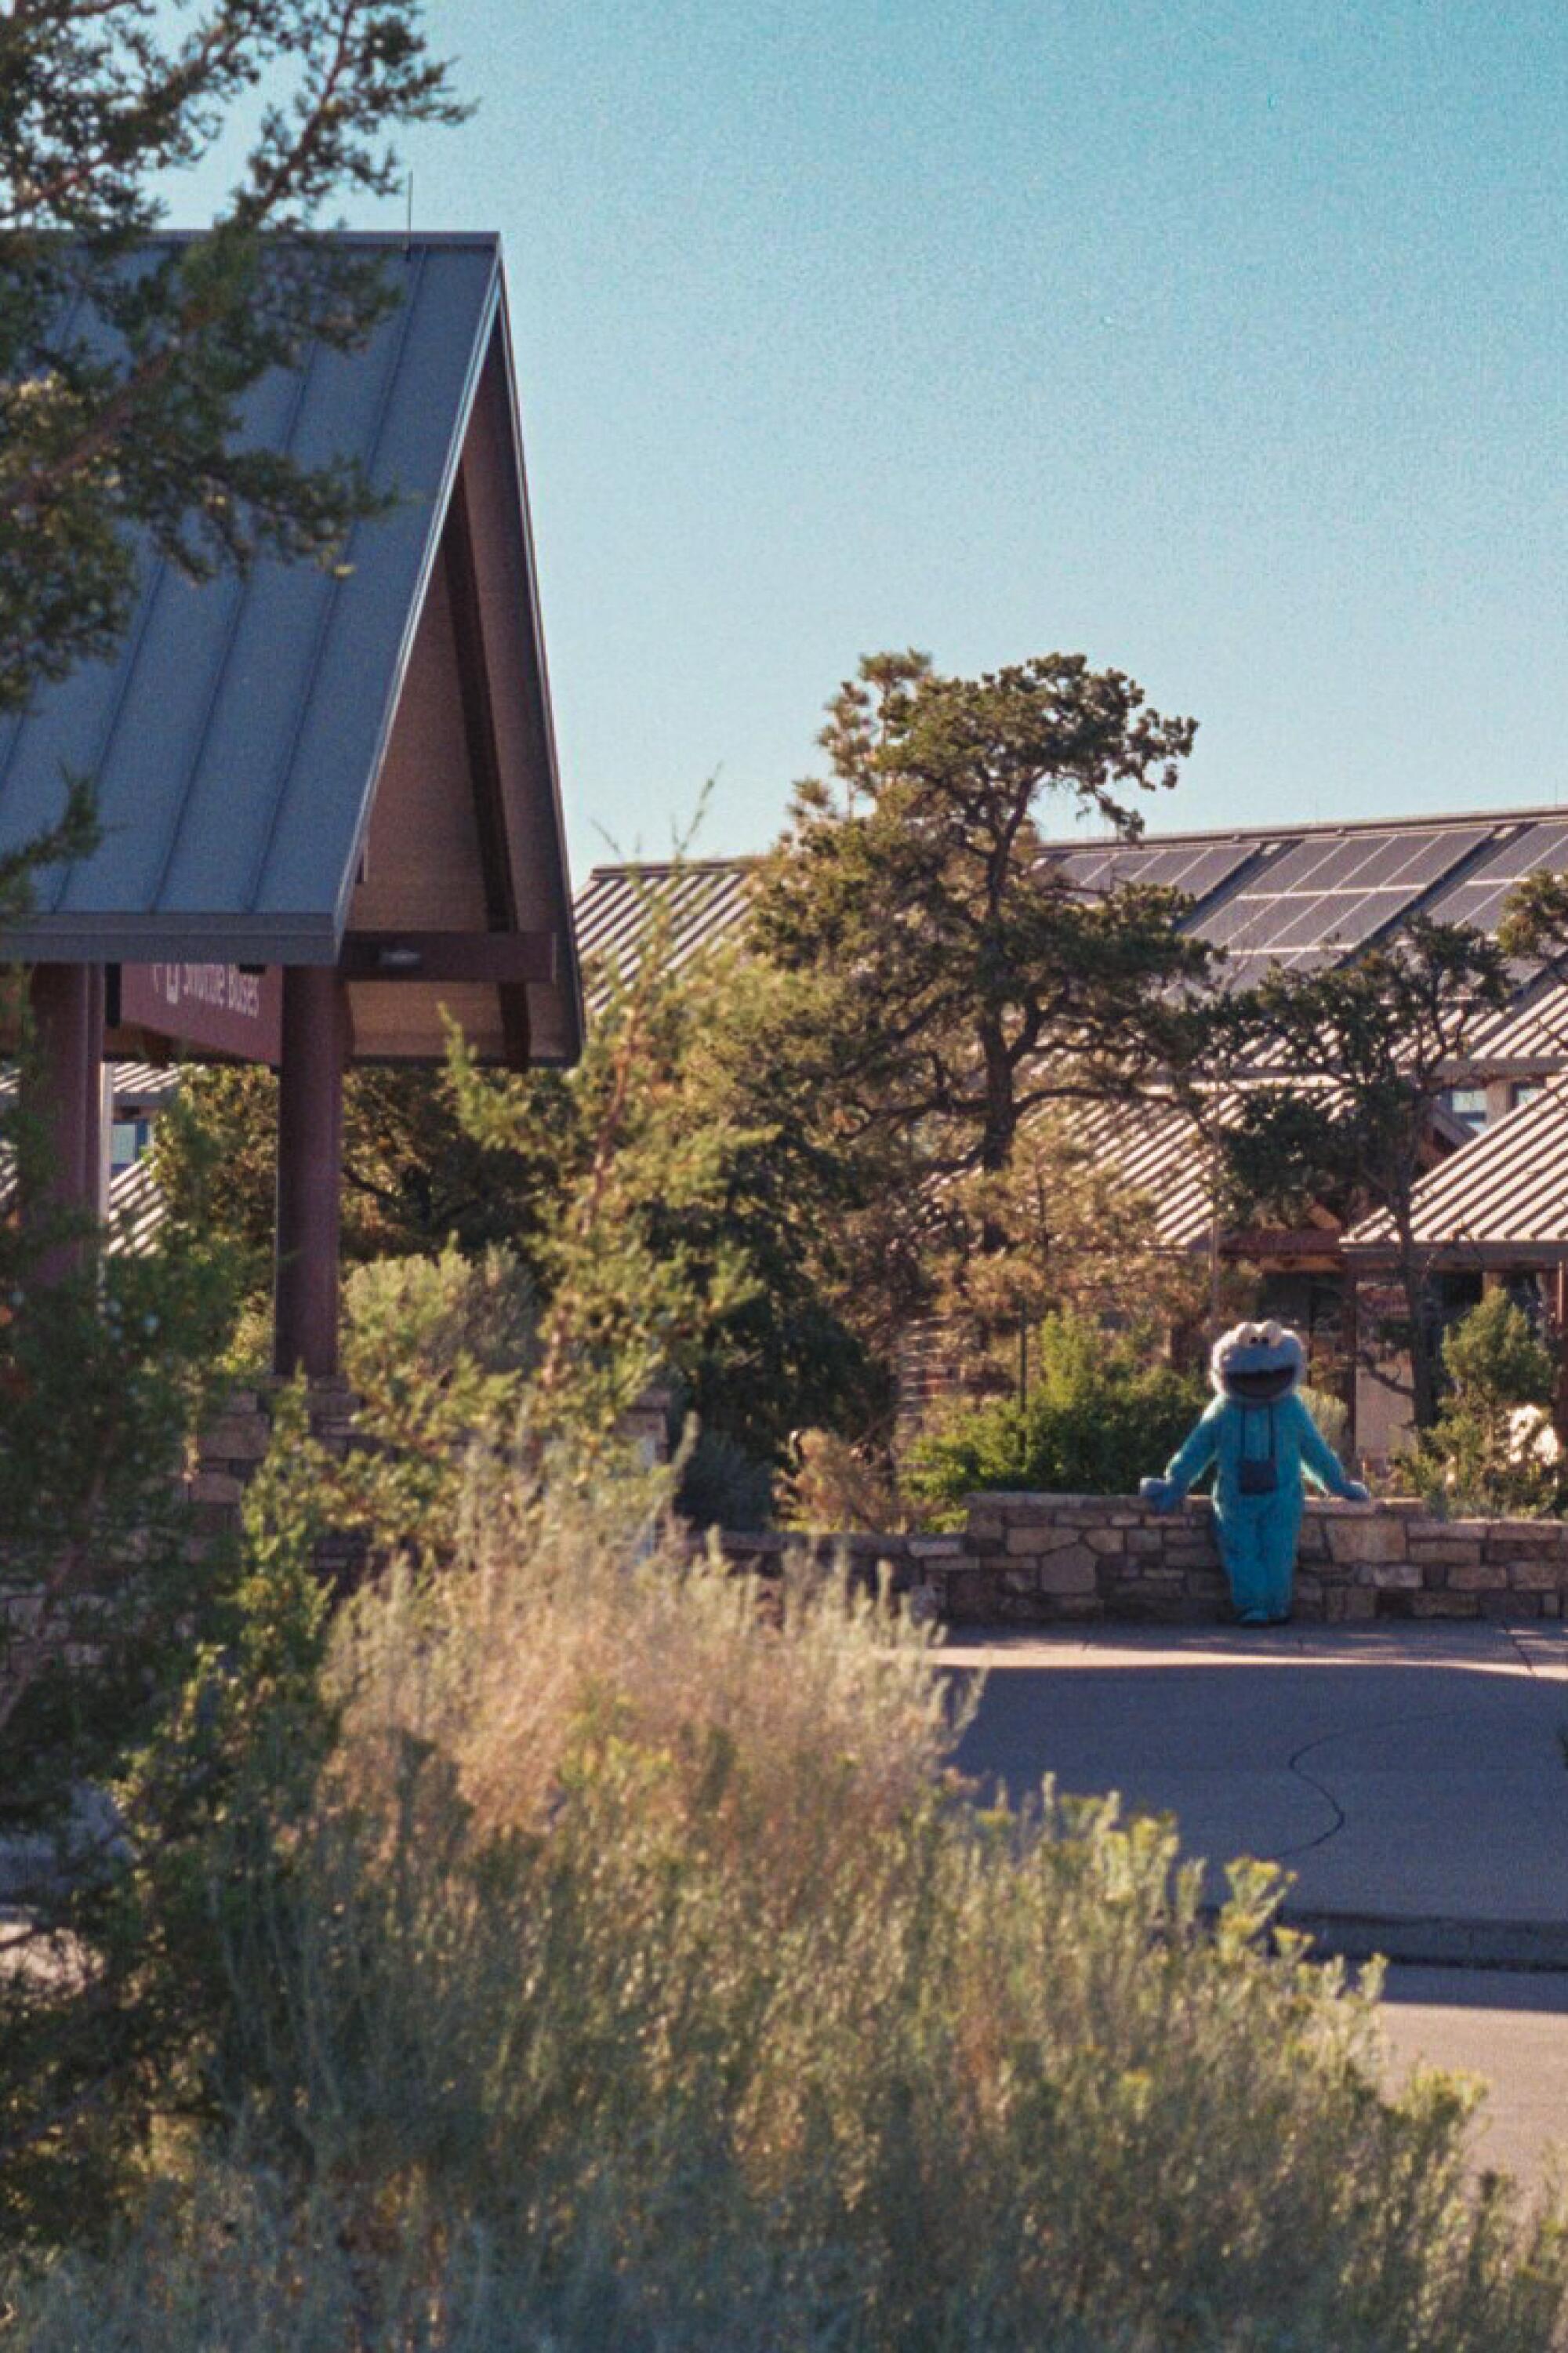 A lone Cookie Monster sitting outside of the Grand Canyon Visitor Center.